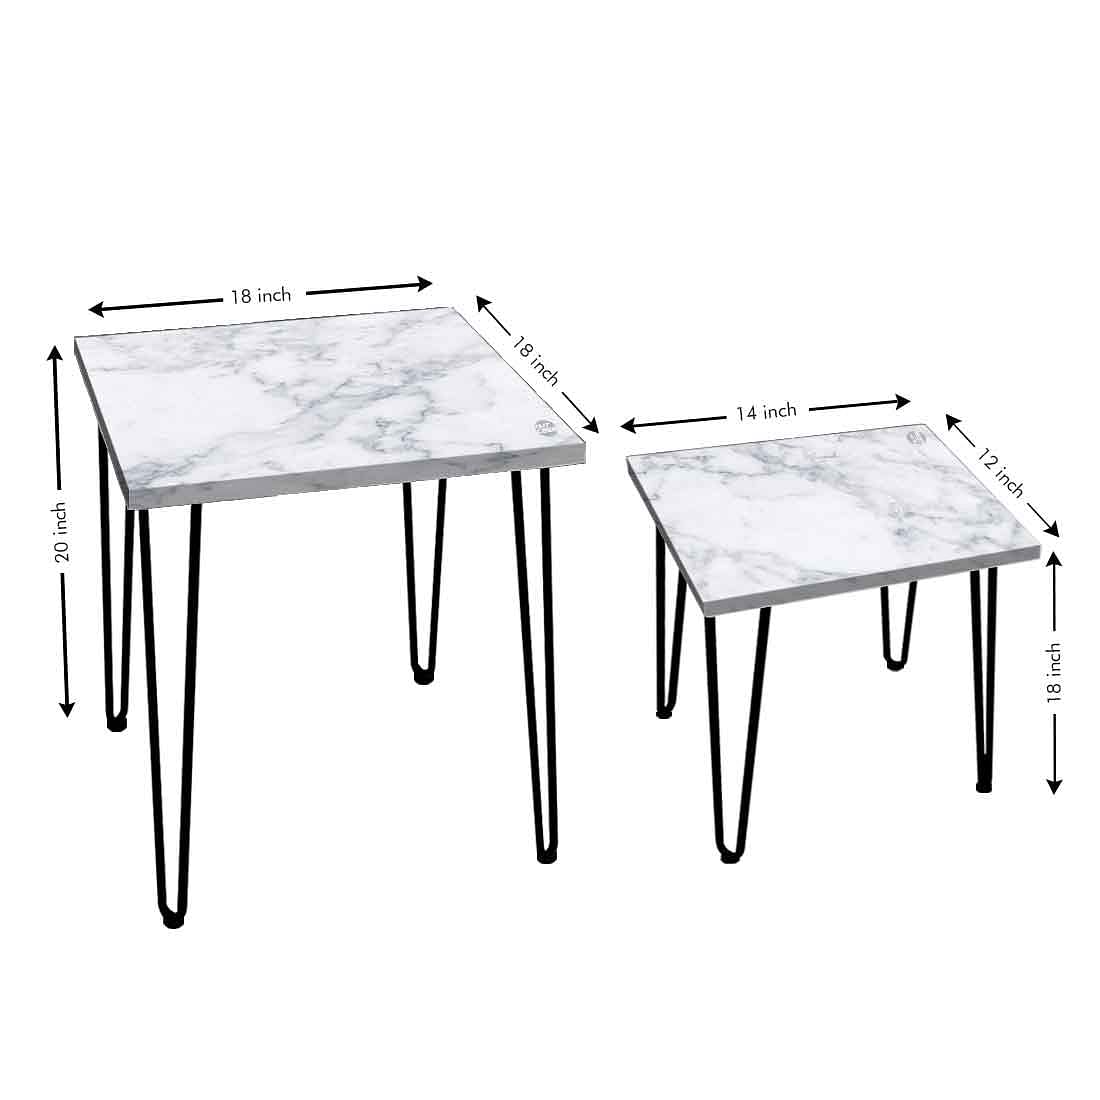 Patio Nesting Tables Set of 2 for Living Room Outdoors & Office - White Marble Nutcase